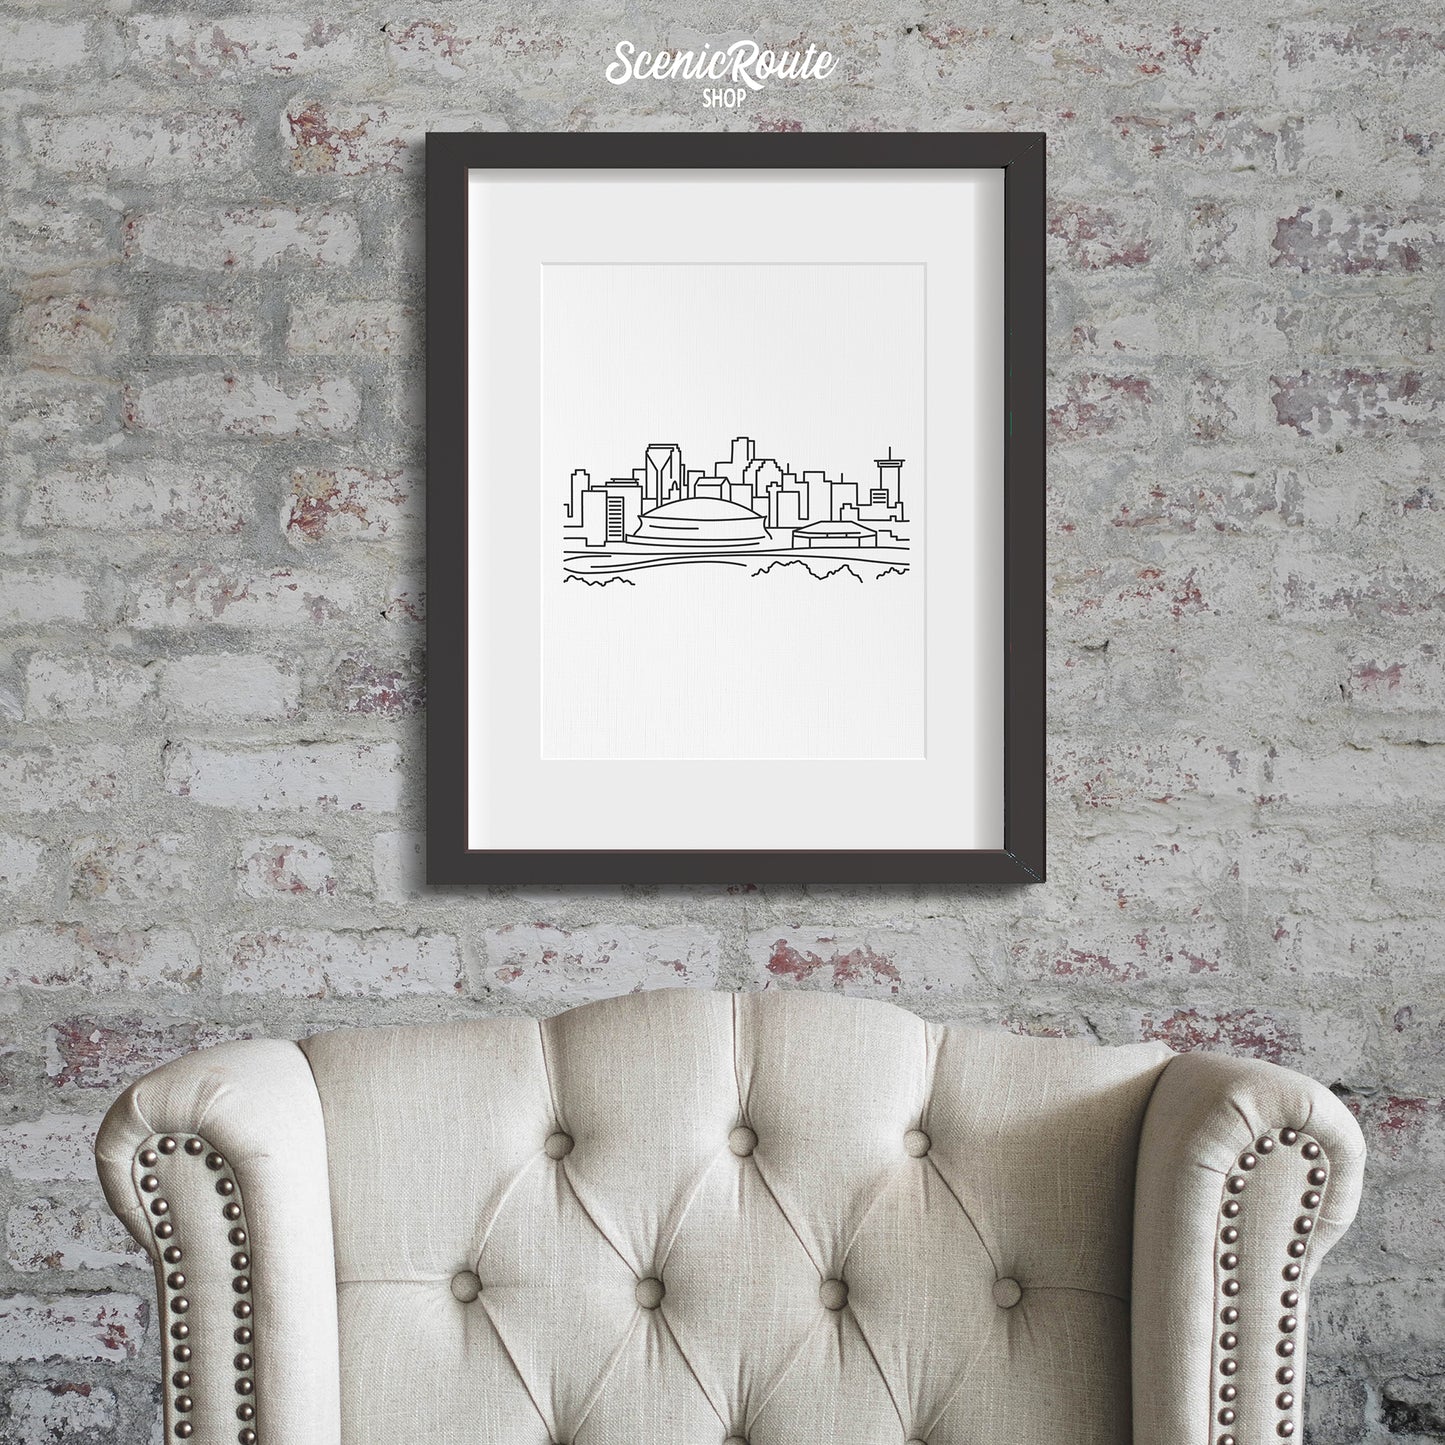 A framed line art drawing of the New Orleans Skyline hanging on a brick wall above a chair